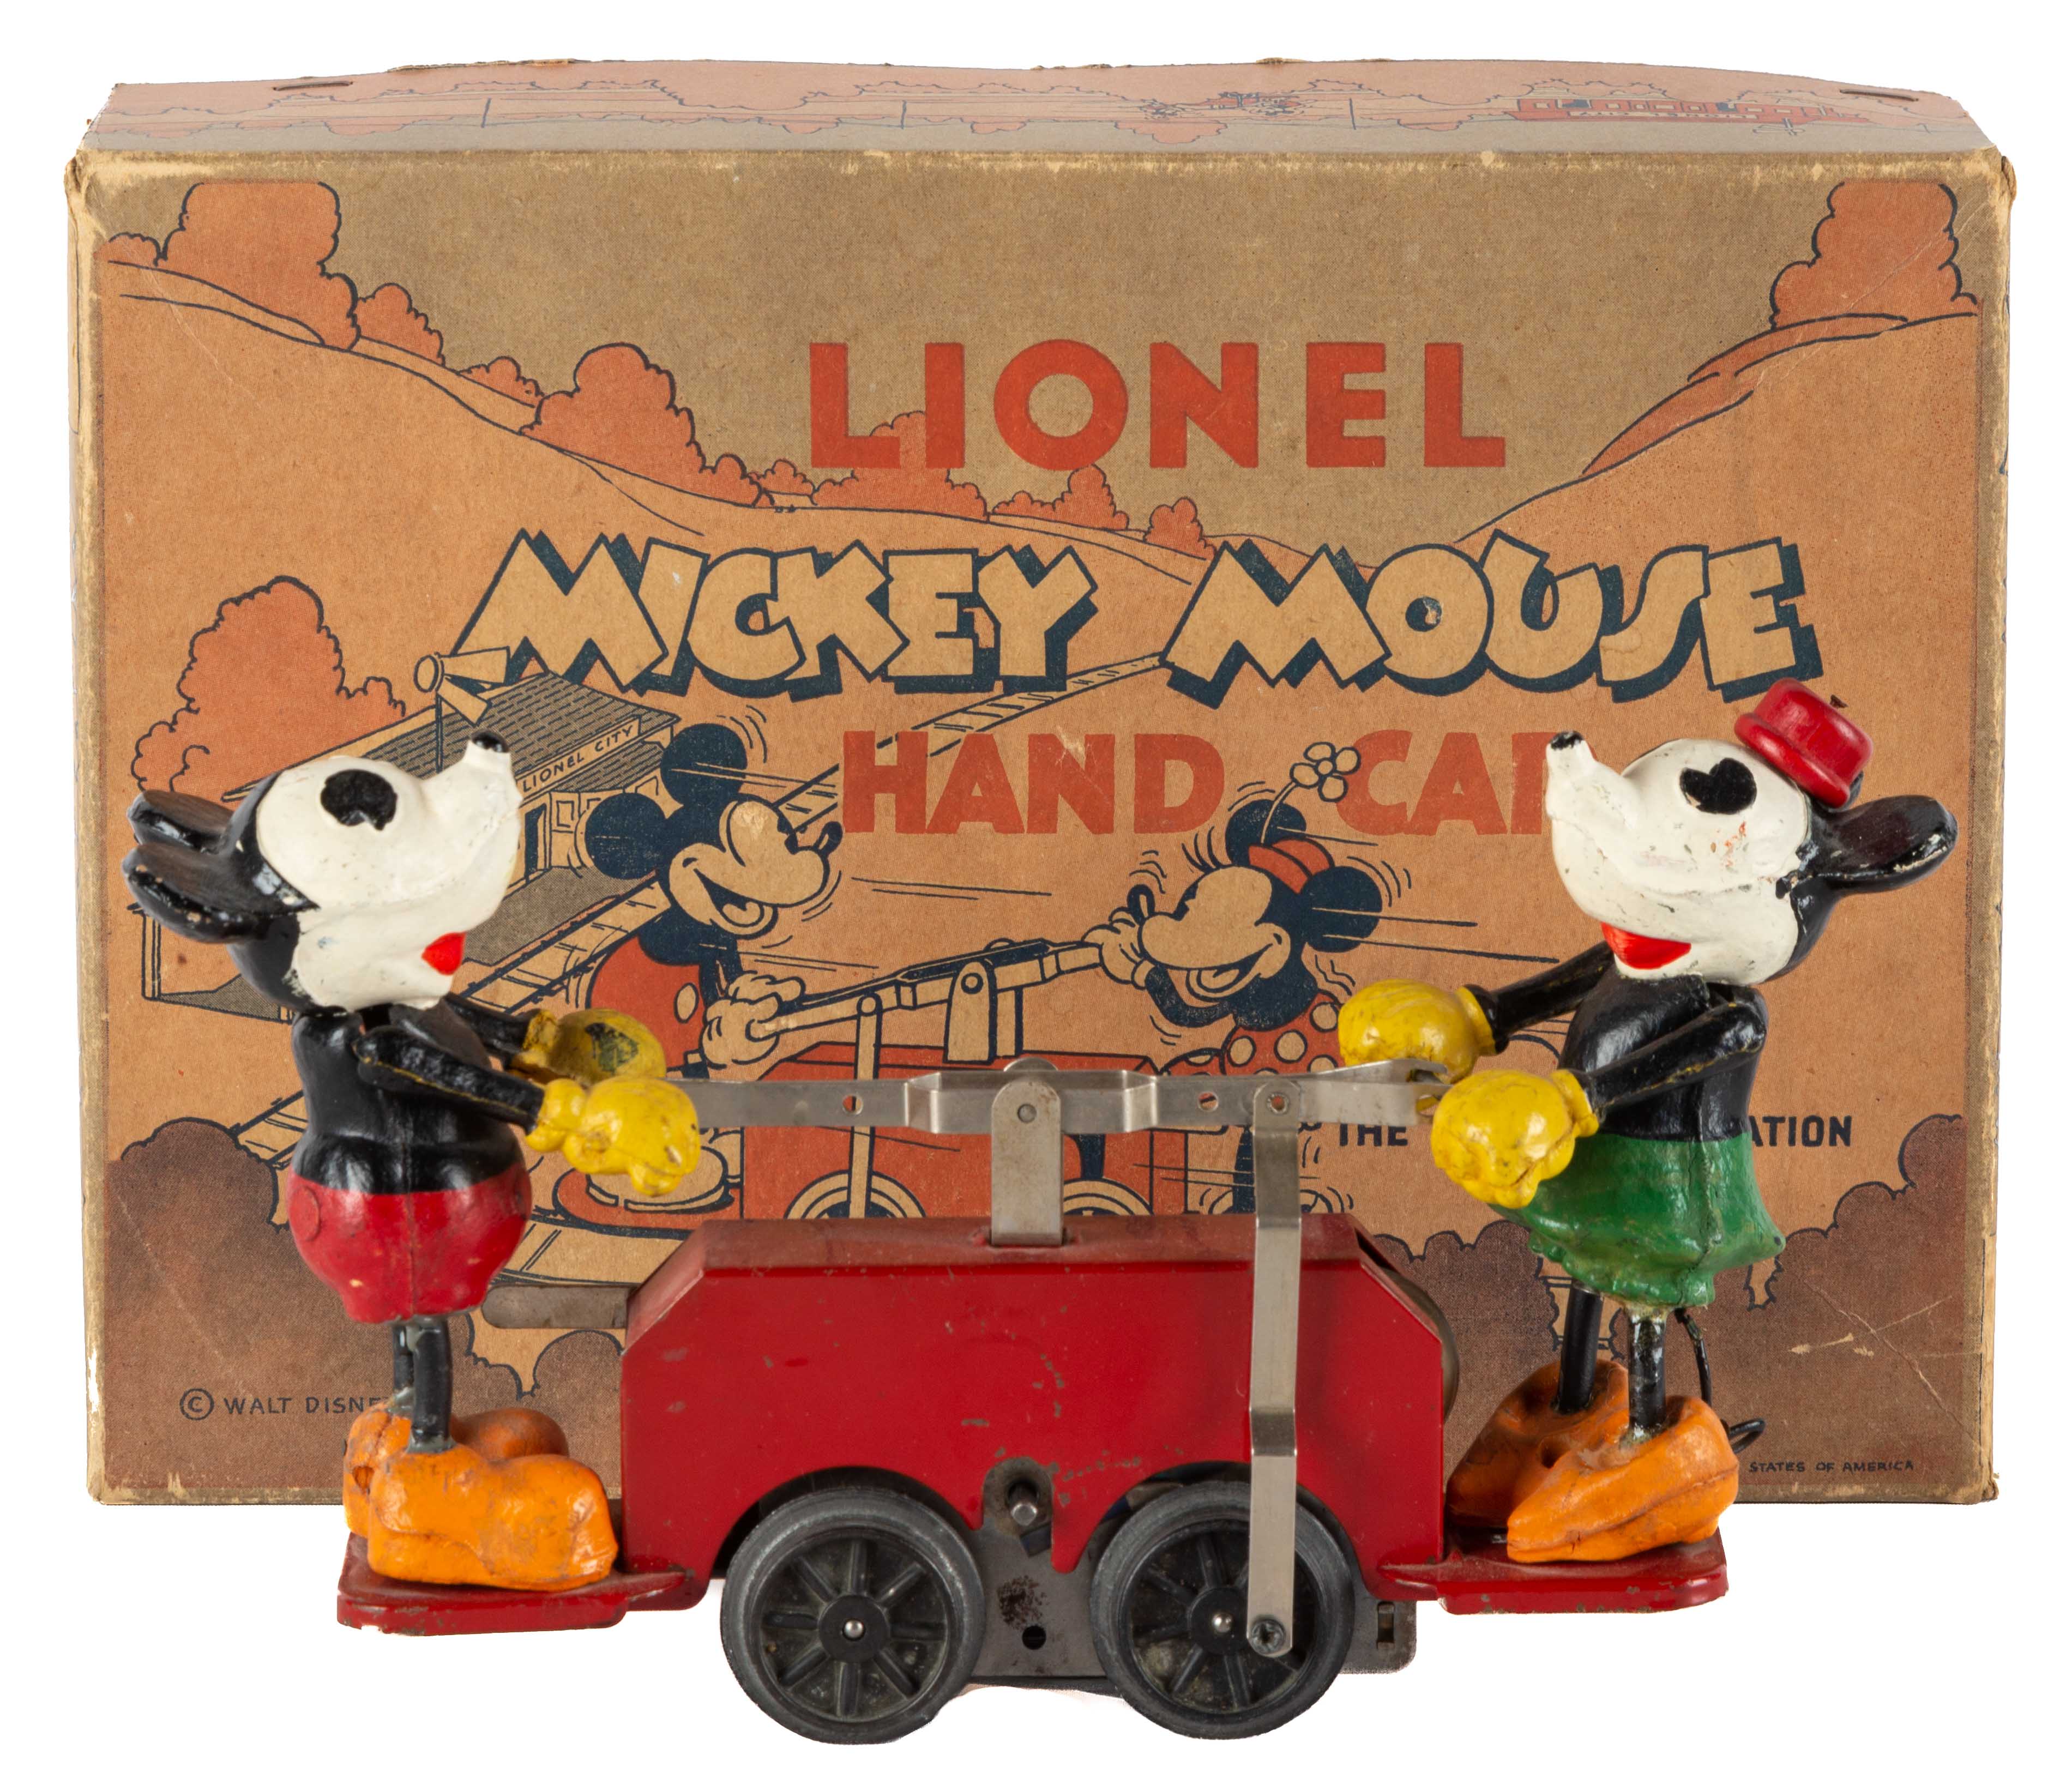 LIONEL MICKEY MOUSE HAND CAR with 28d36f